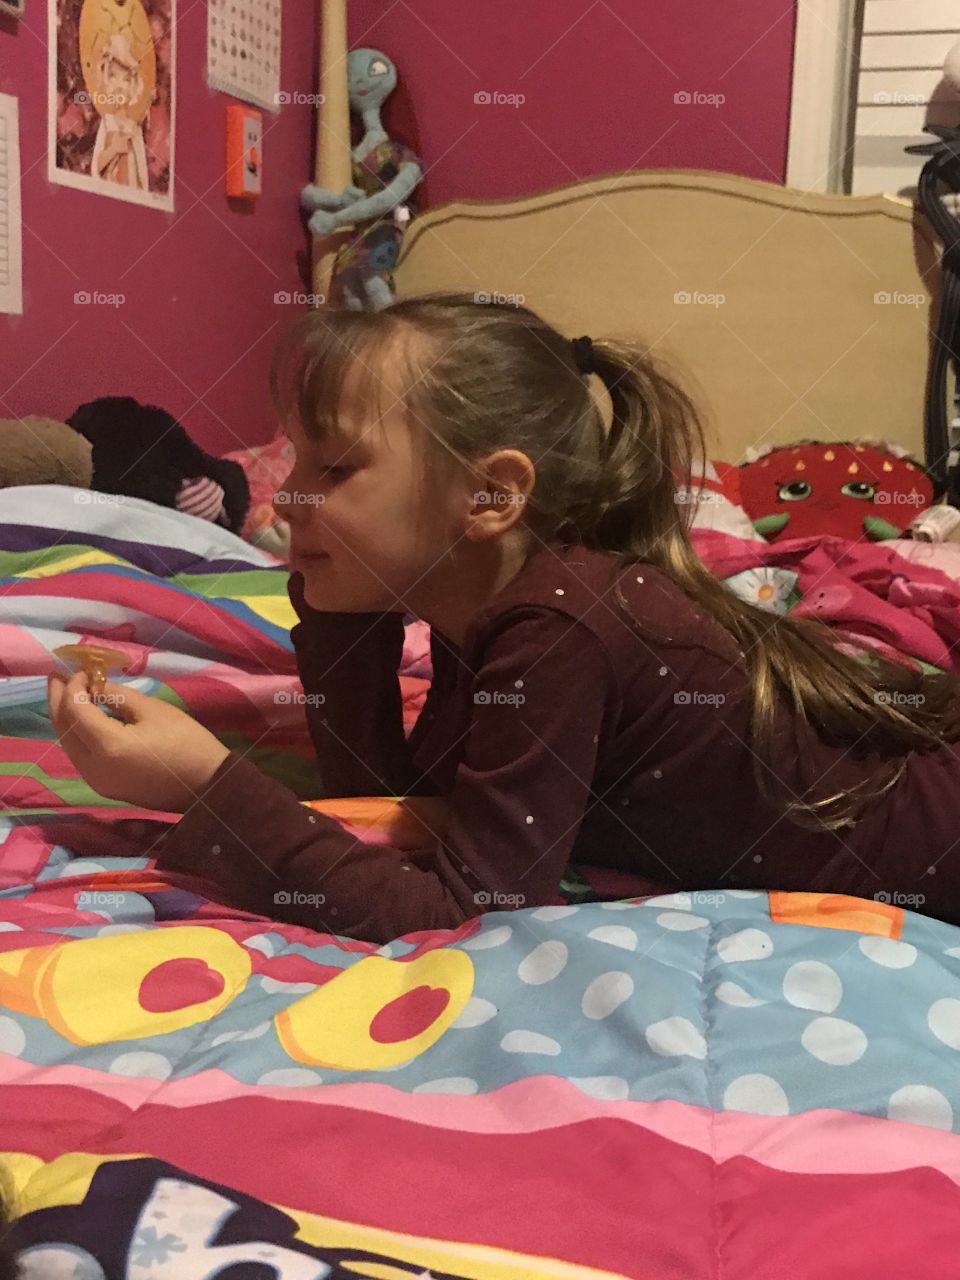 My beautiful daughter pretending to talk on her “ring phone” to her best friend. 